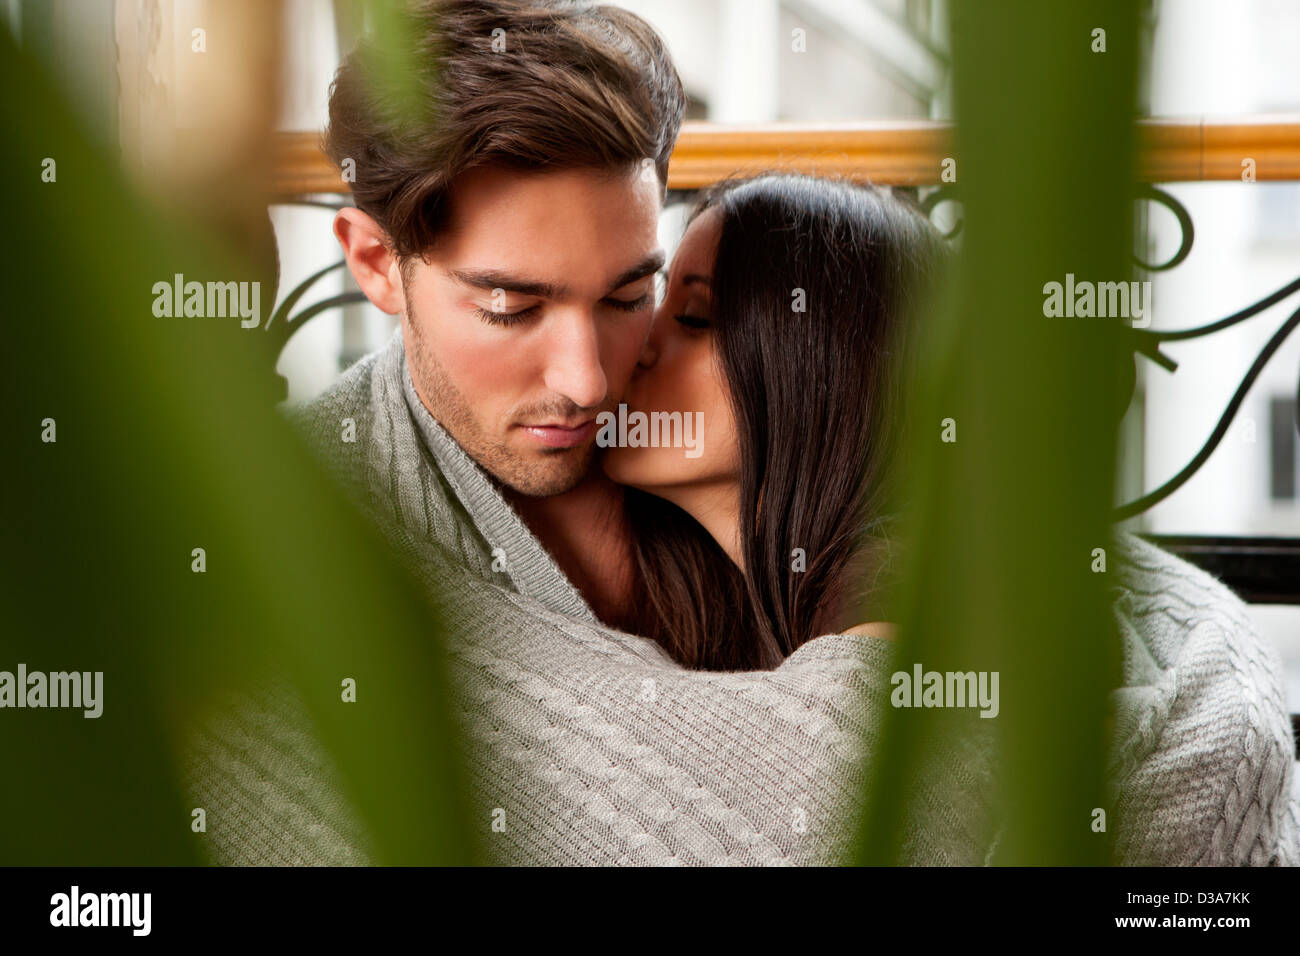 Kissing couple wrapped in blanket Stock Photo